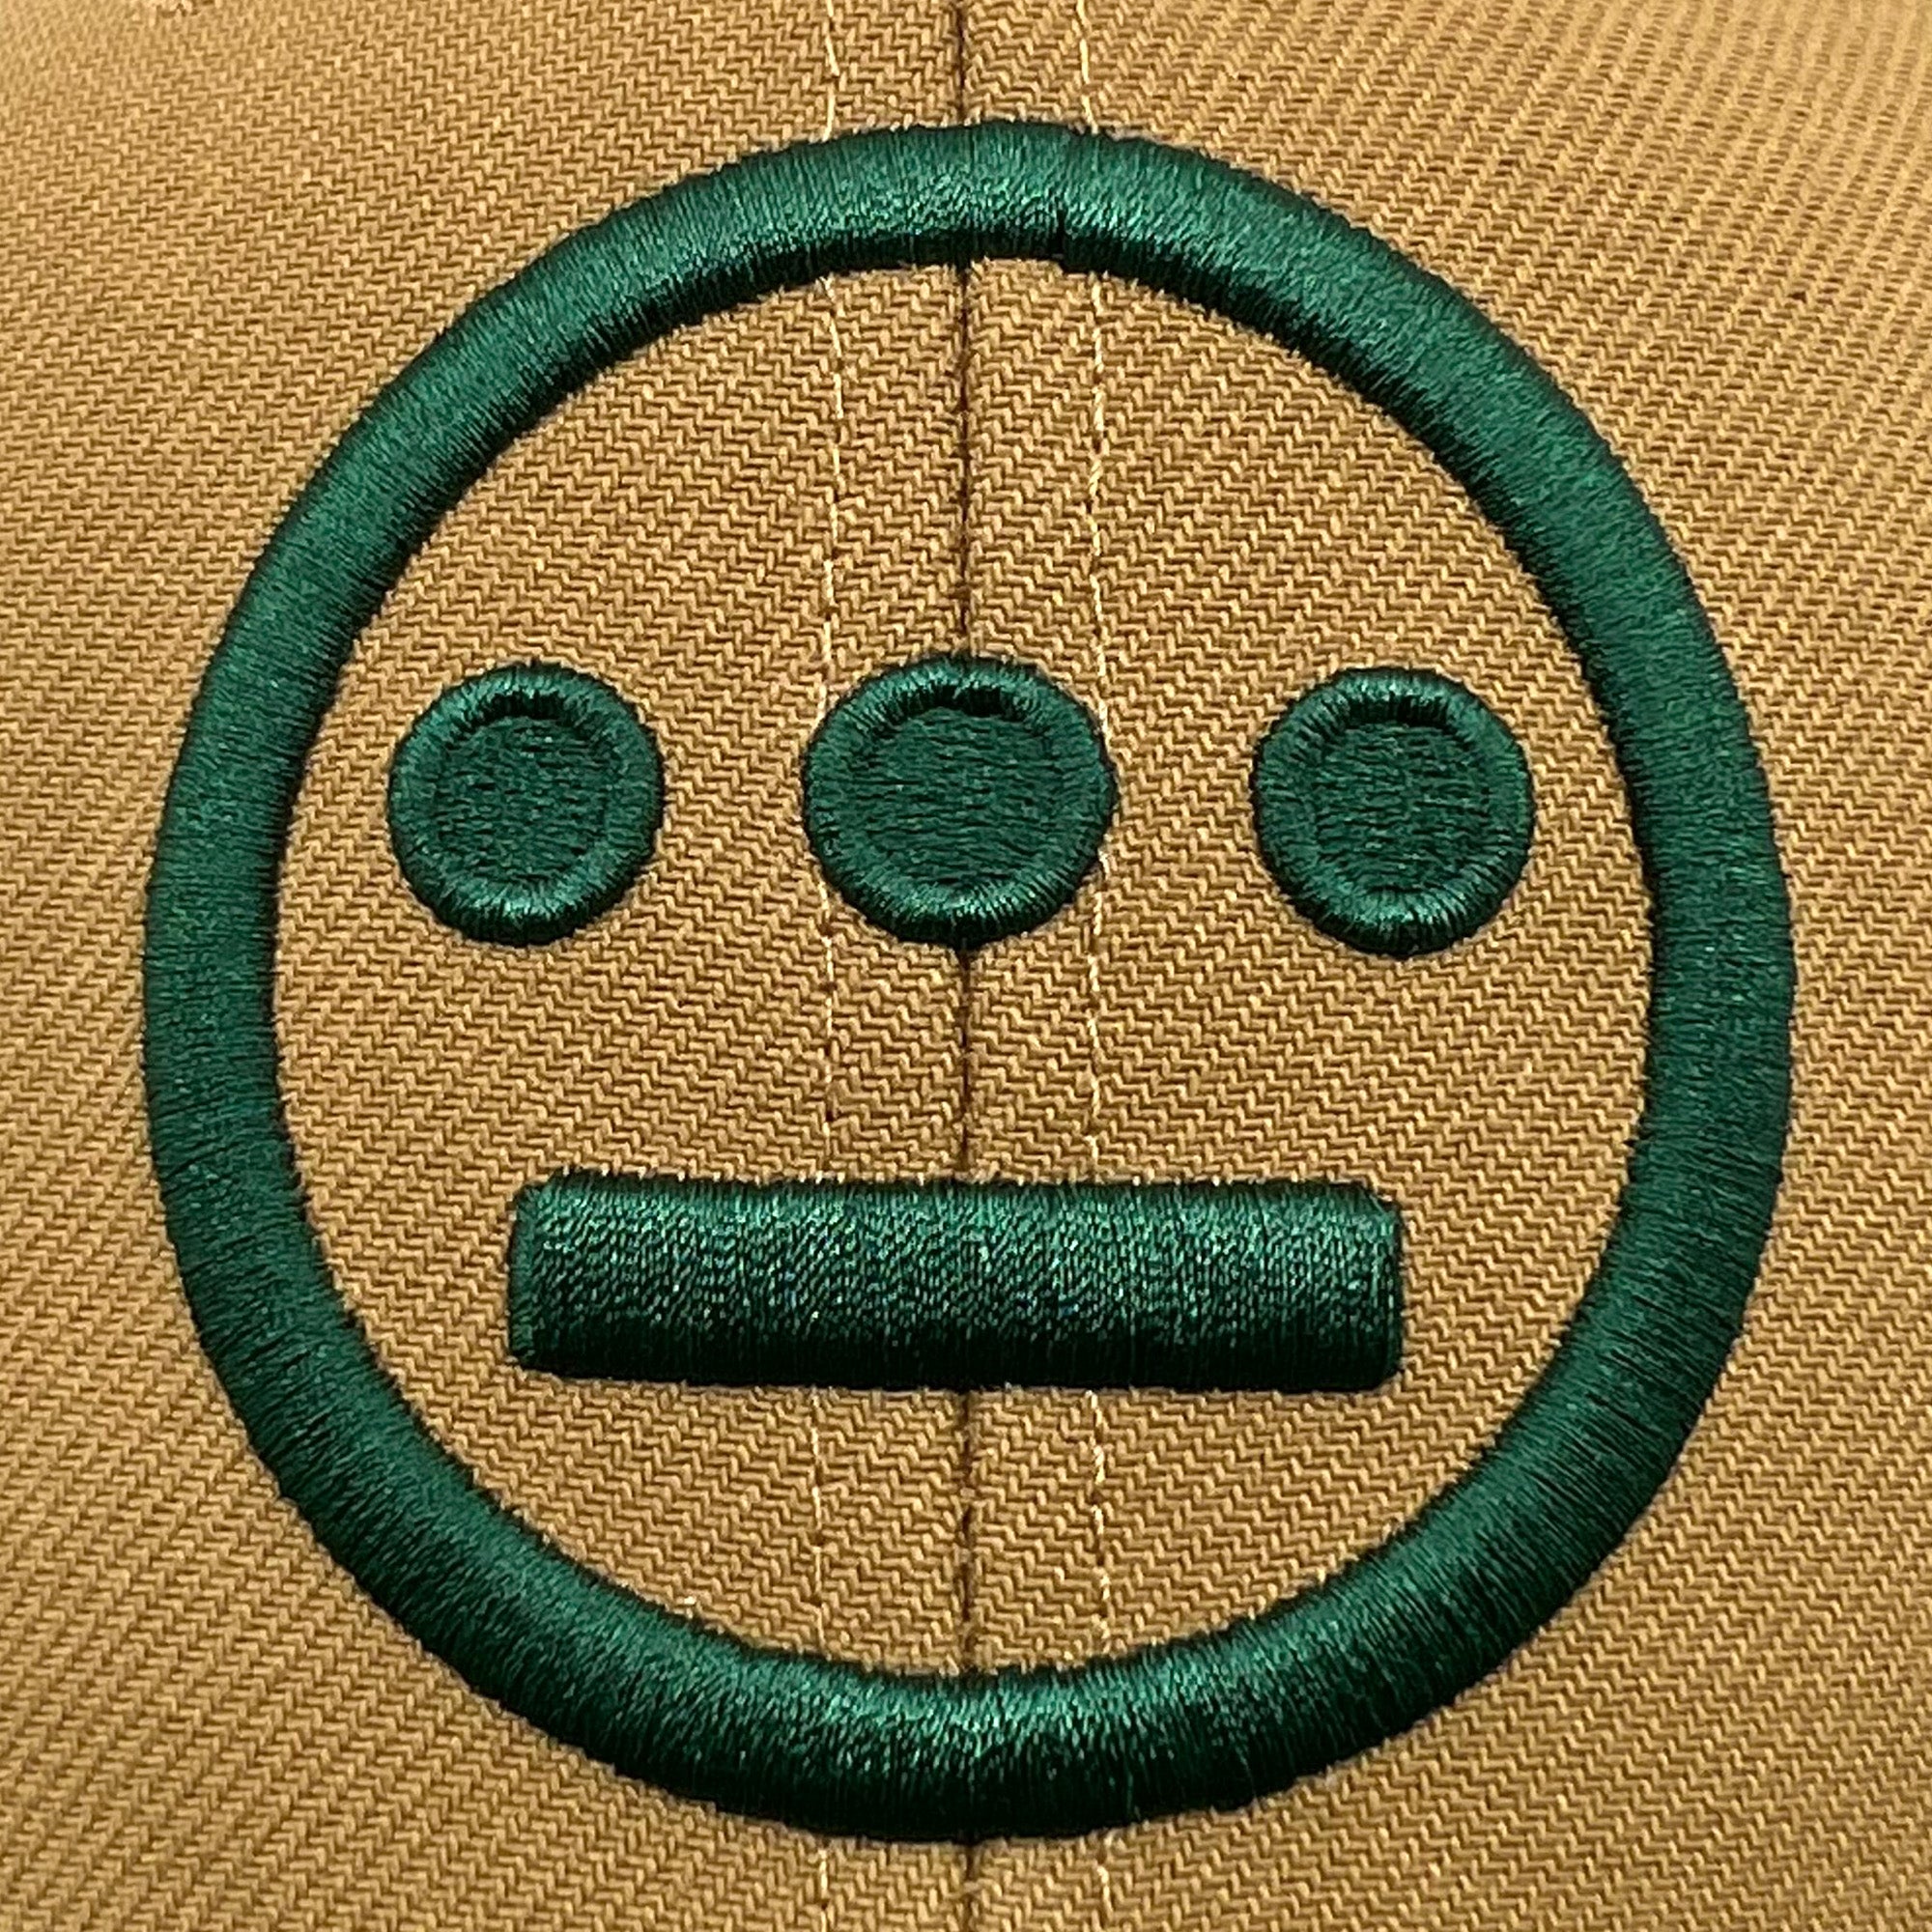 Detailed close-up of embroidered green Hiero hip hop logo on a brown Mitchell & Ness cap.